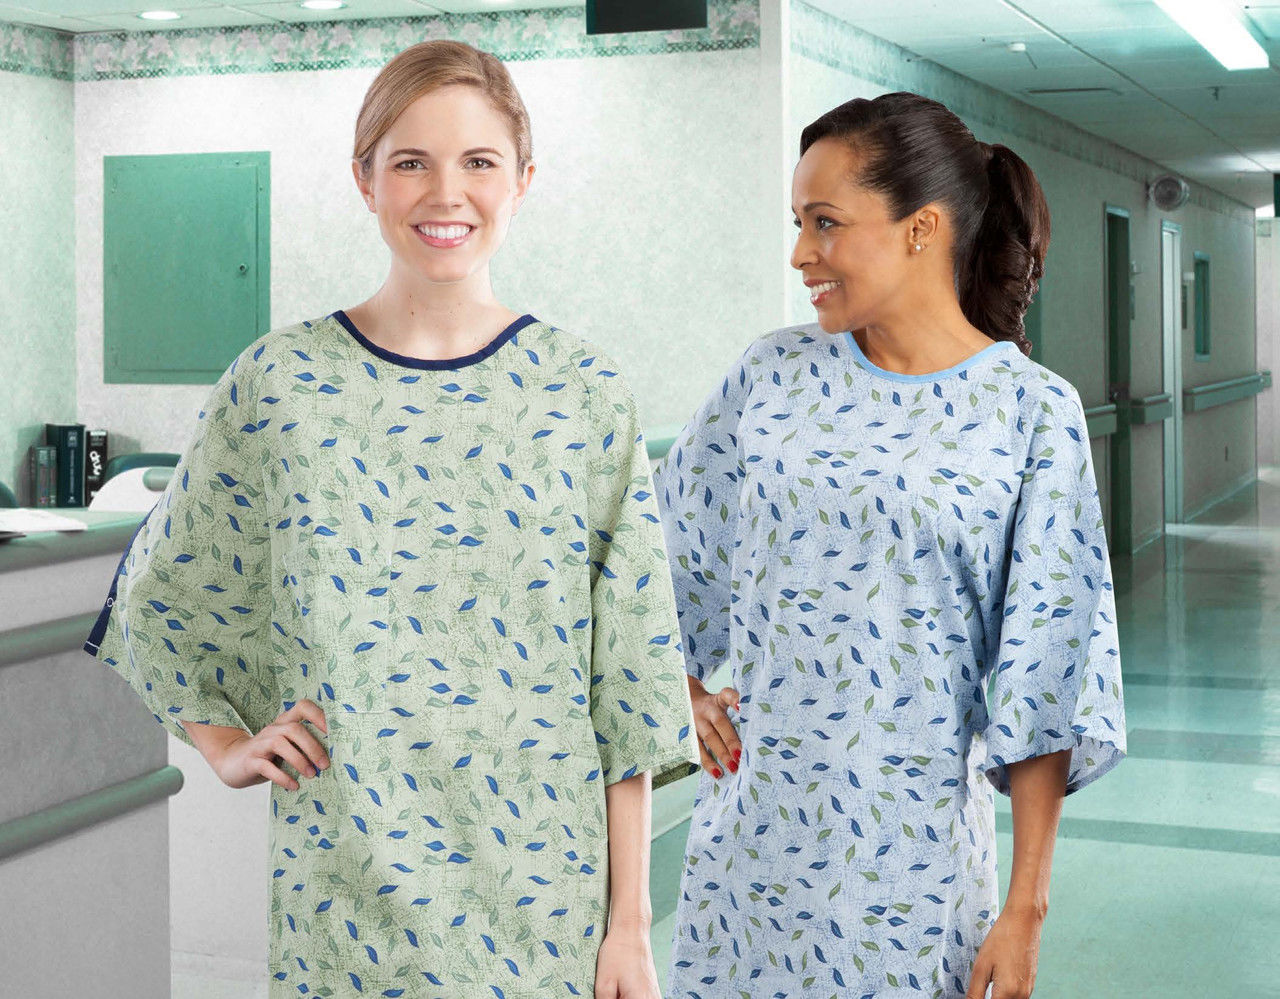 What material are patient gowns made of?